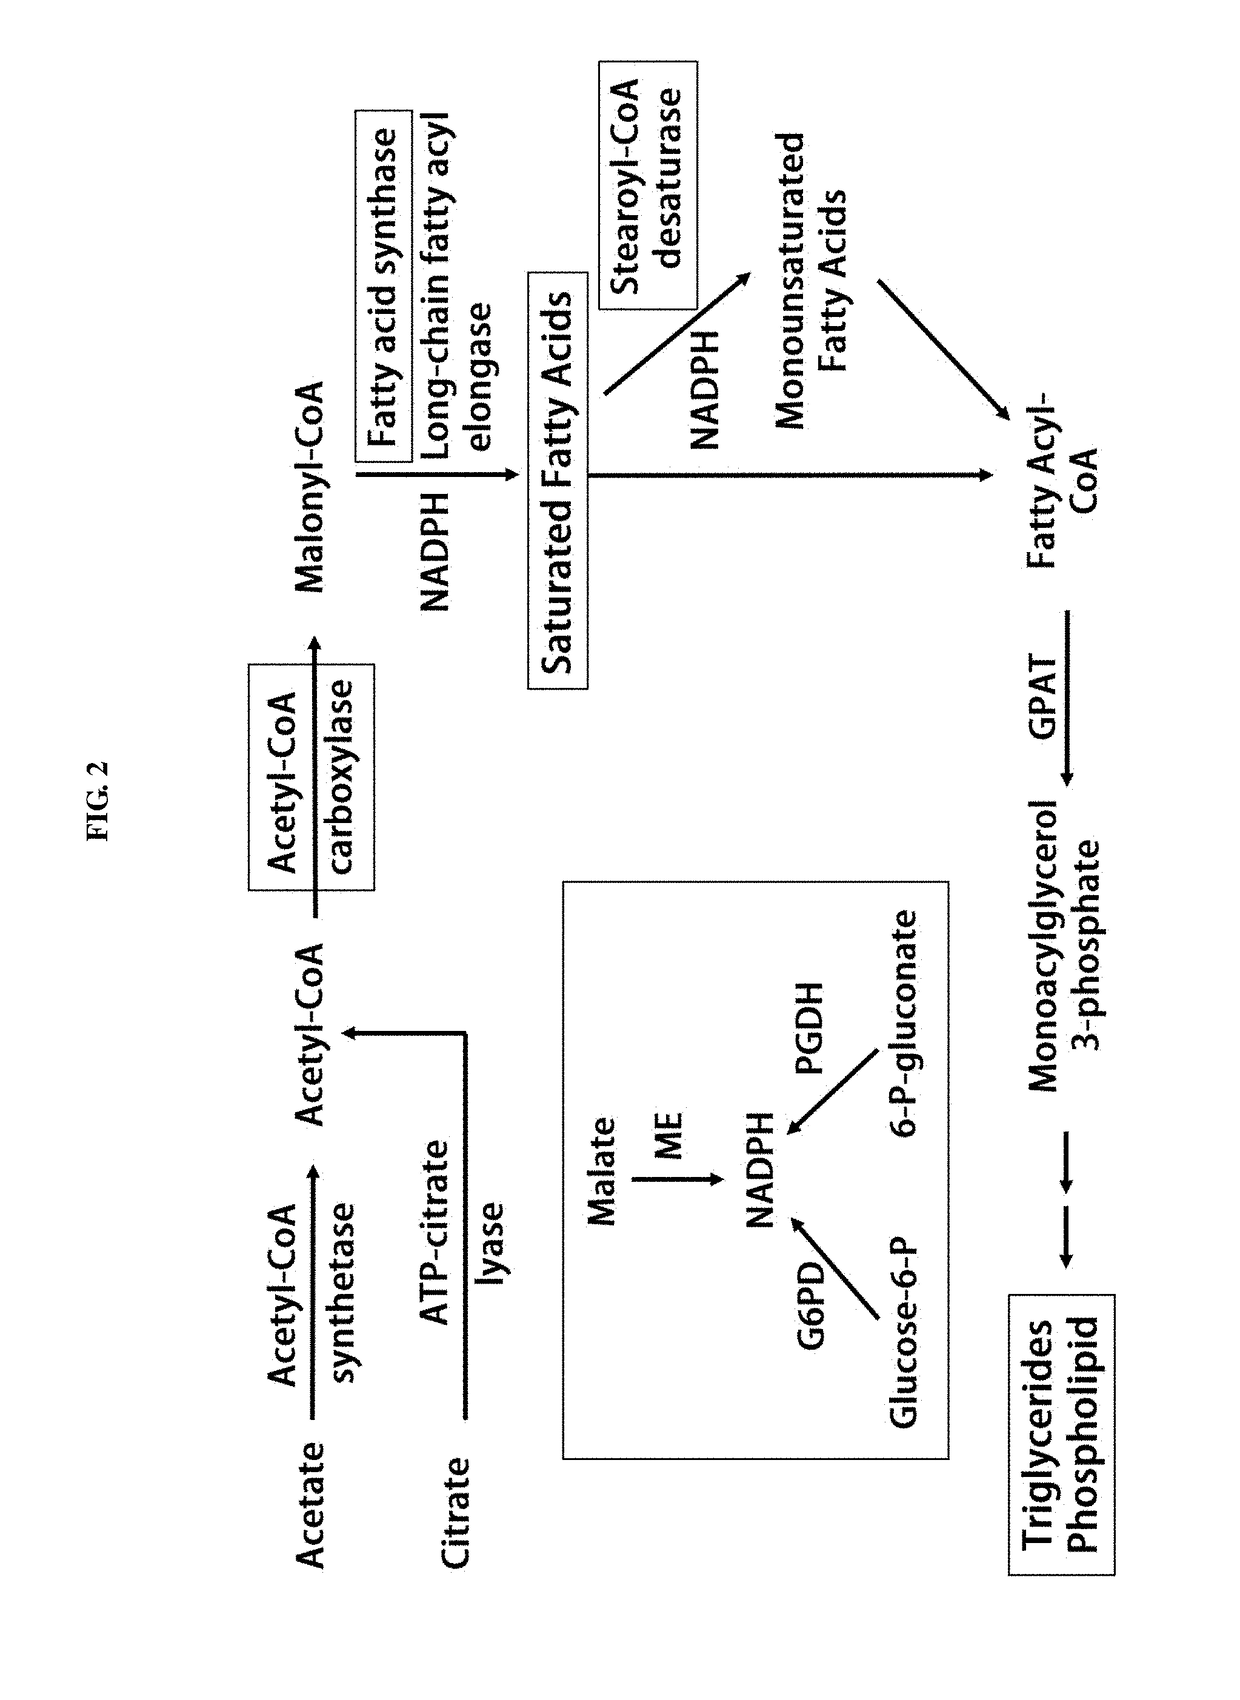 Pharmaceutical composition containing gpr119 ligand as effective ingredient for preventing or treating non-alcoholic steatohepatitis